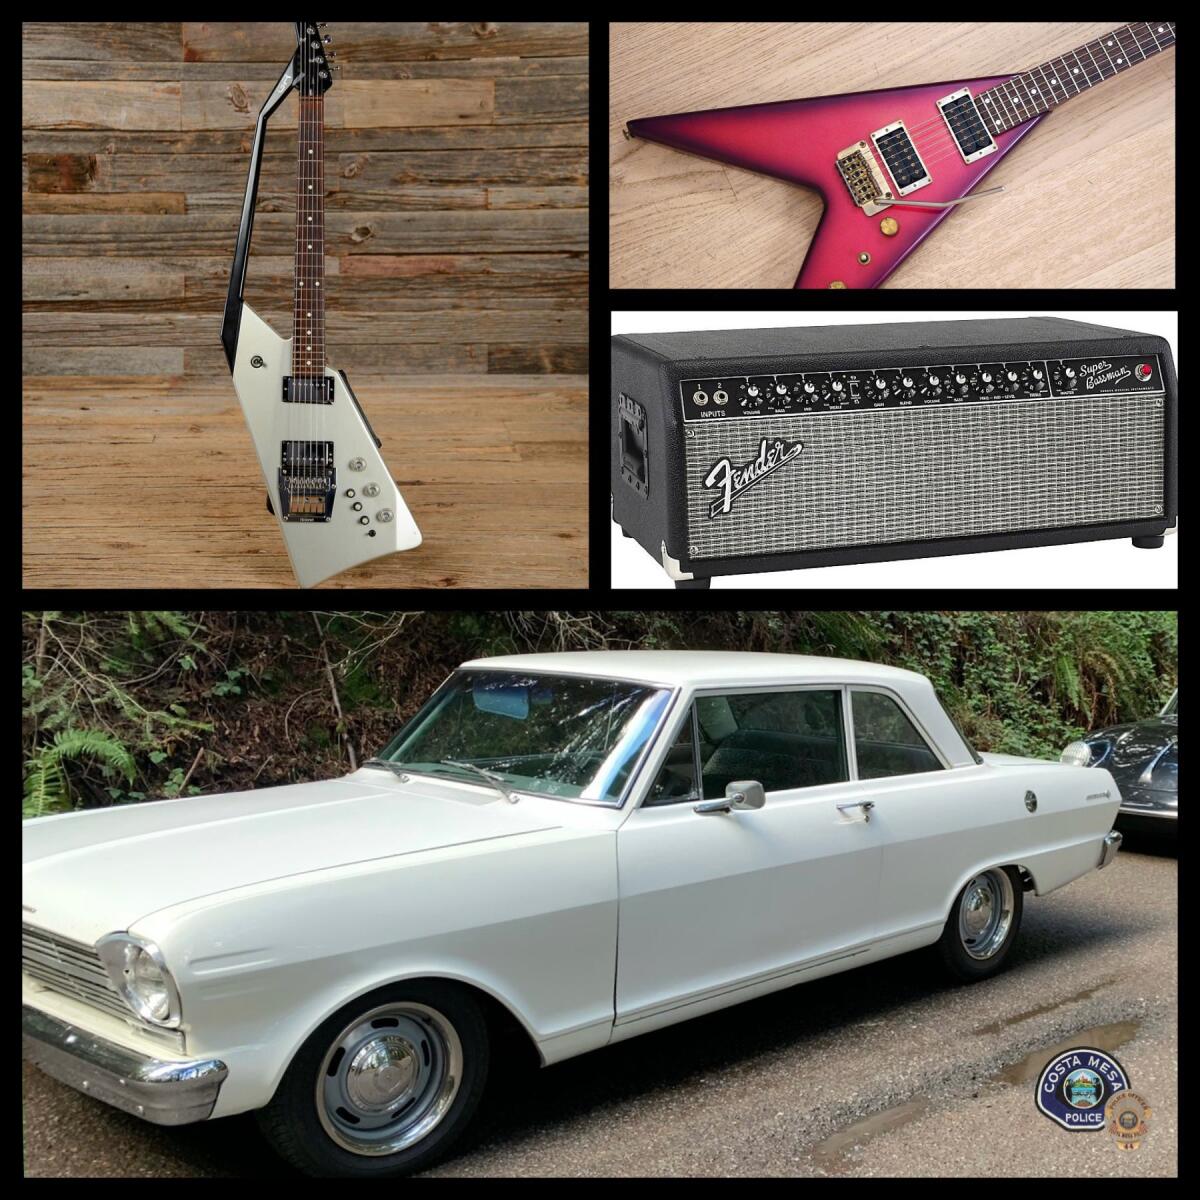 A 1962 Chevy Nova connected to the band Green Day was stolen during commercial burglary in Costa Mesa Friday or Saturday.